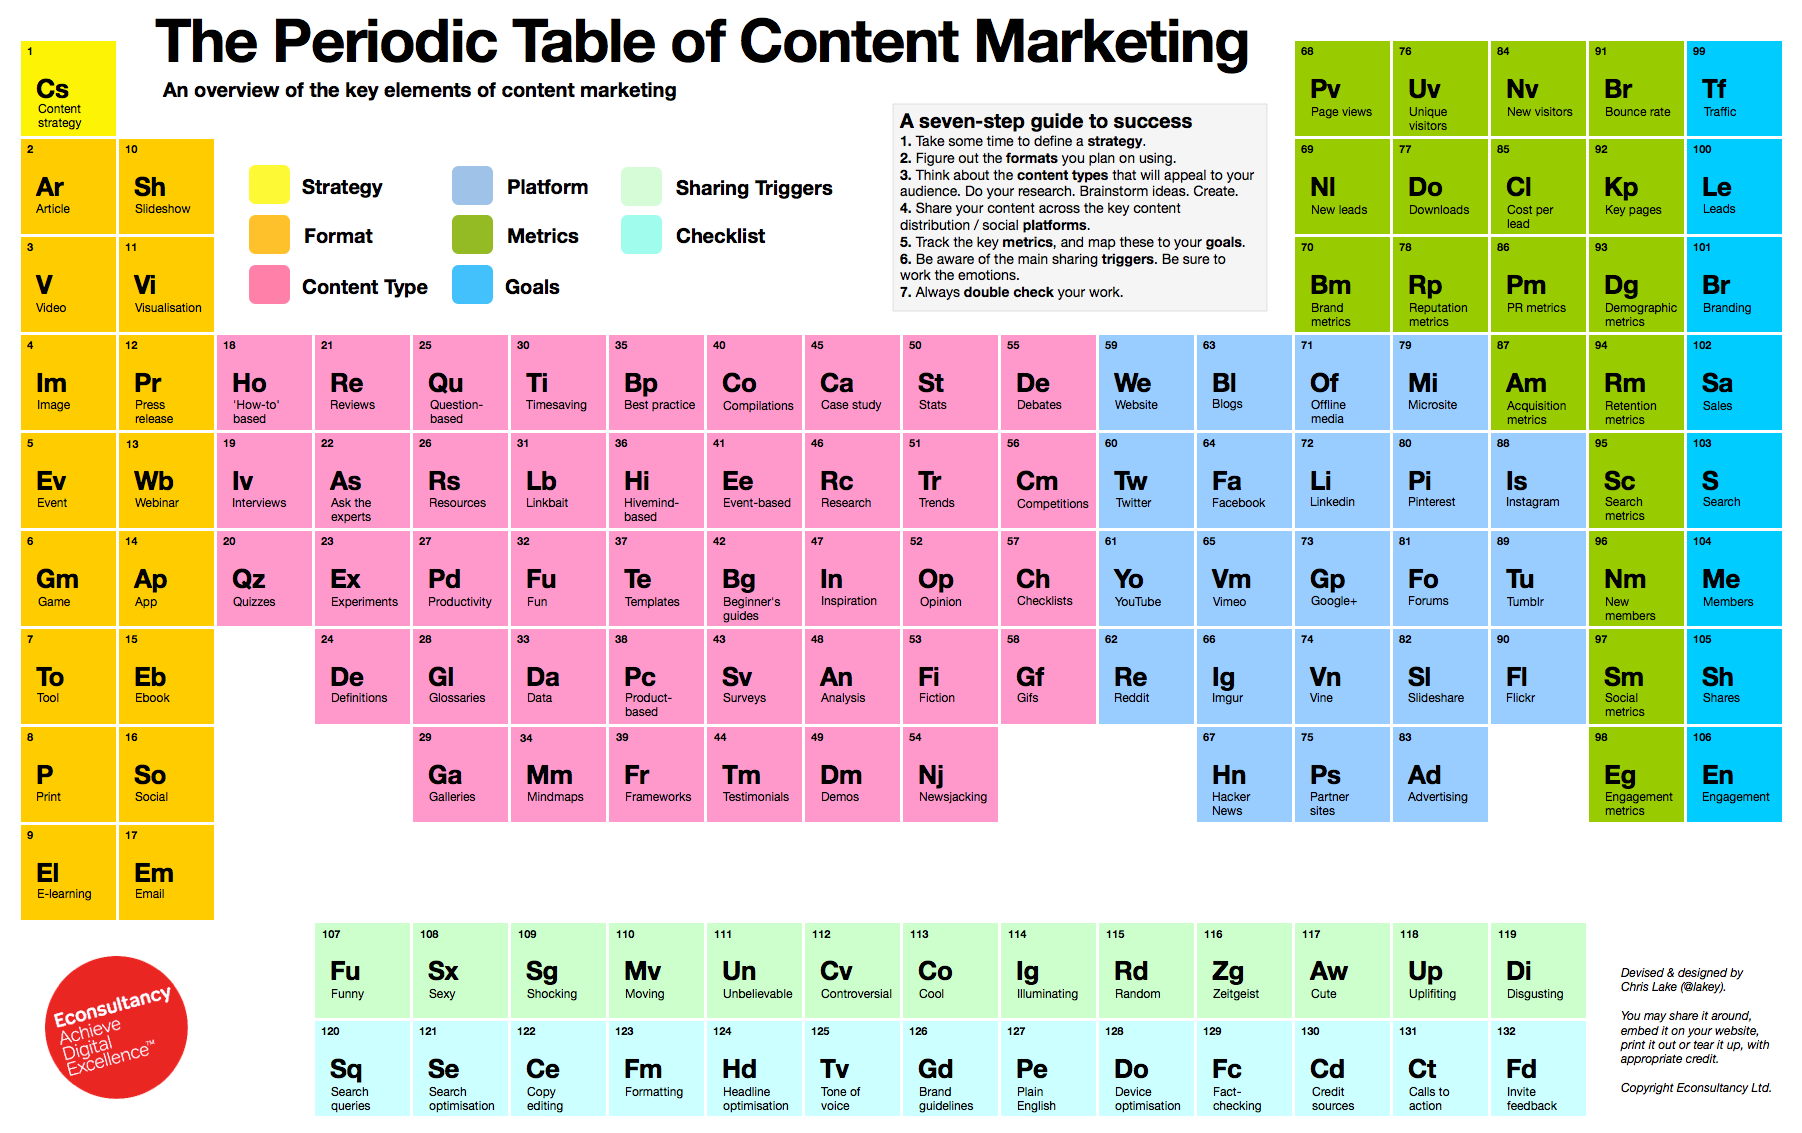 Periodic table of content marketing